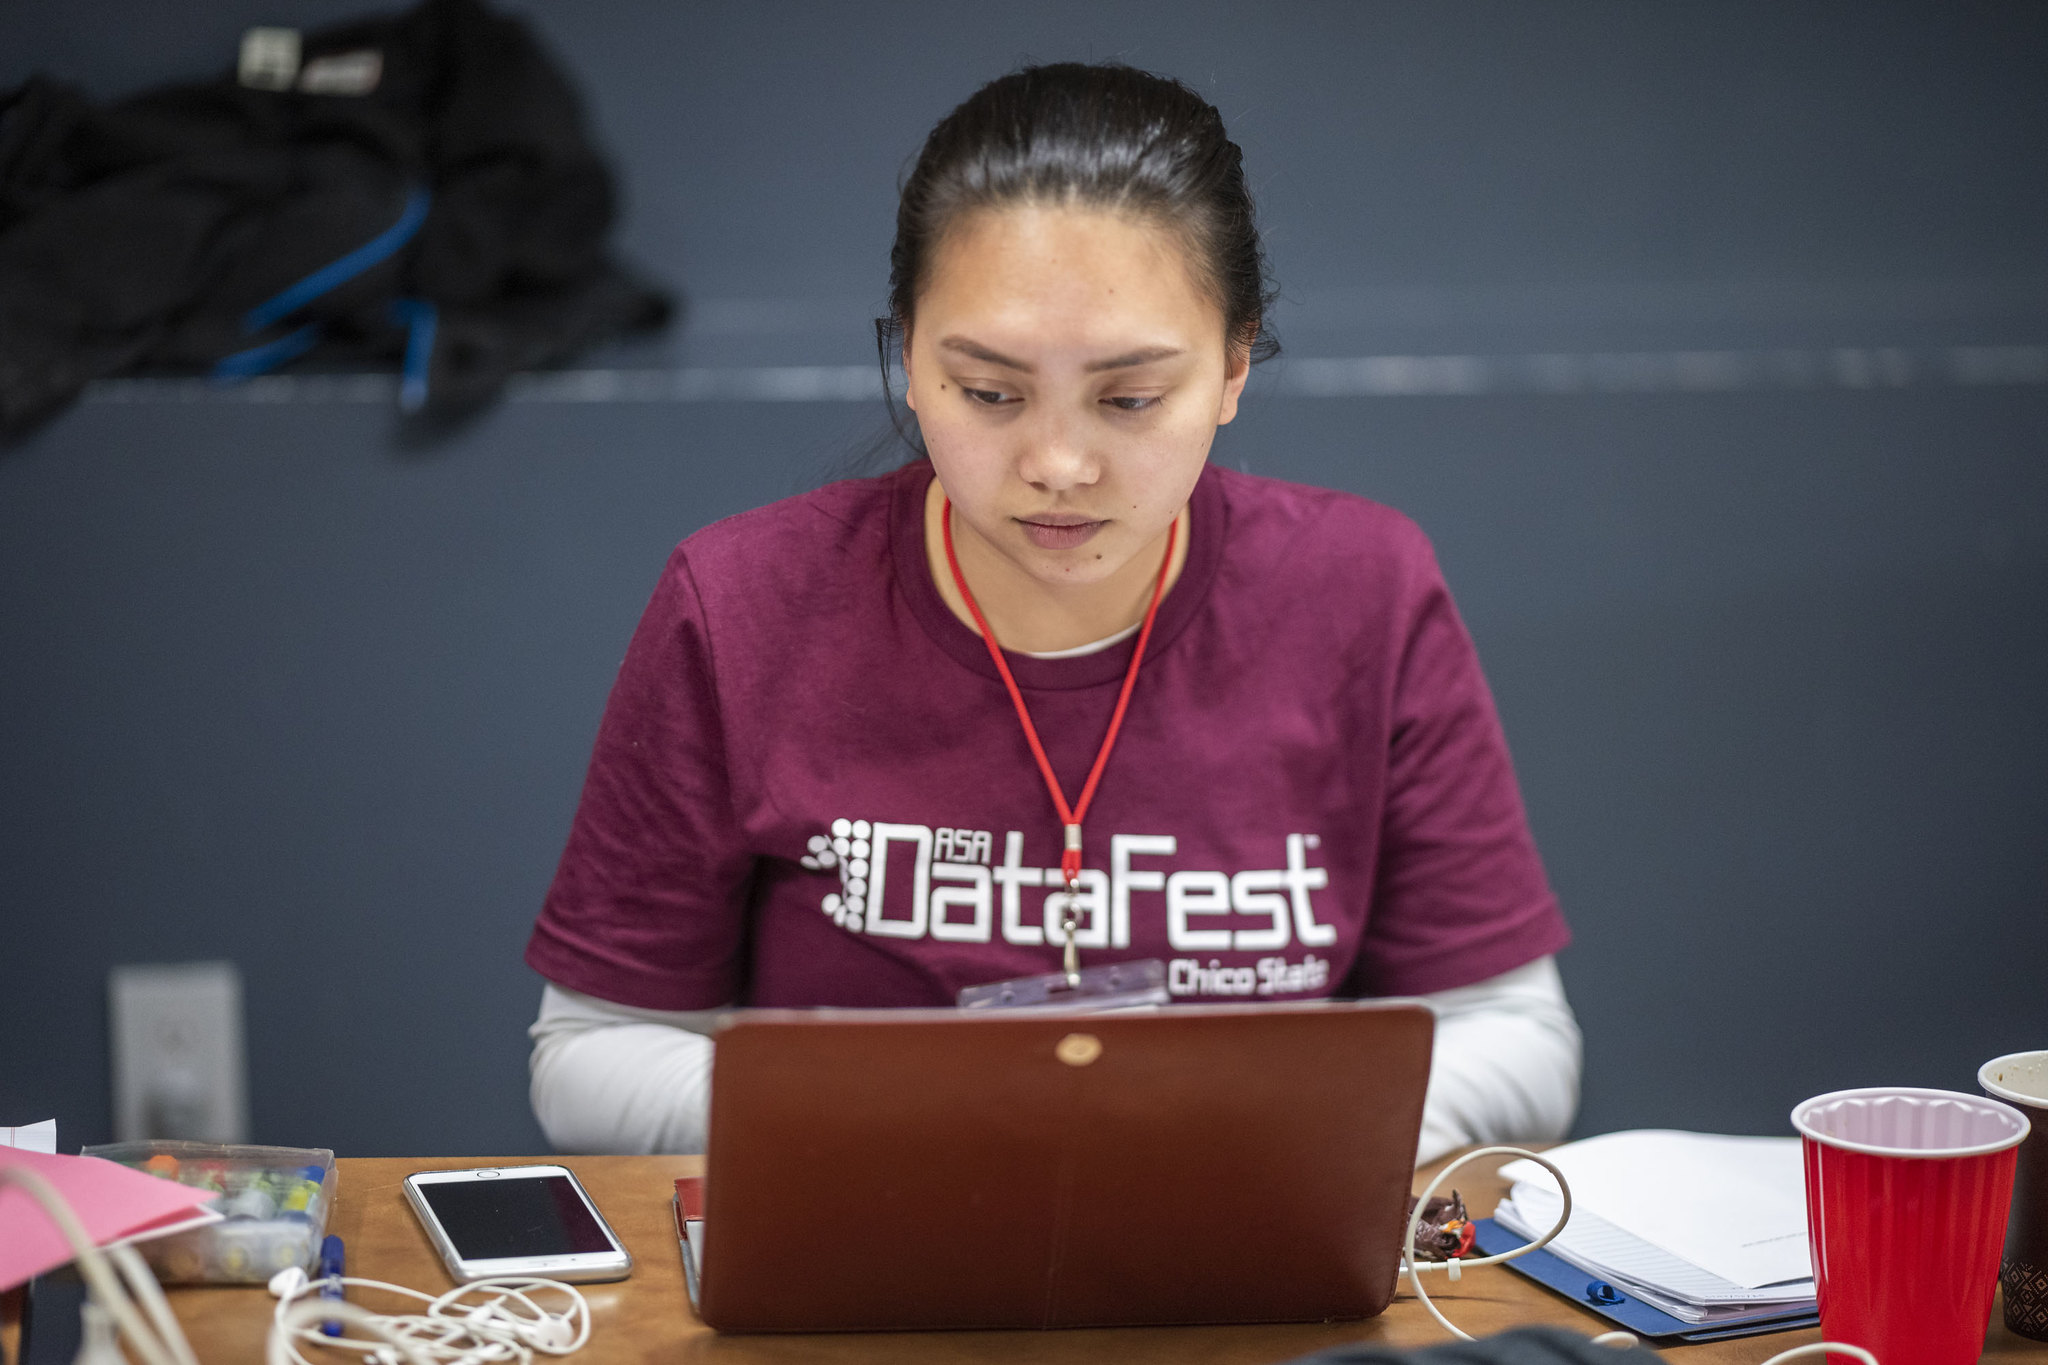 Student participating in DataFest